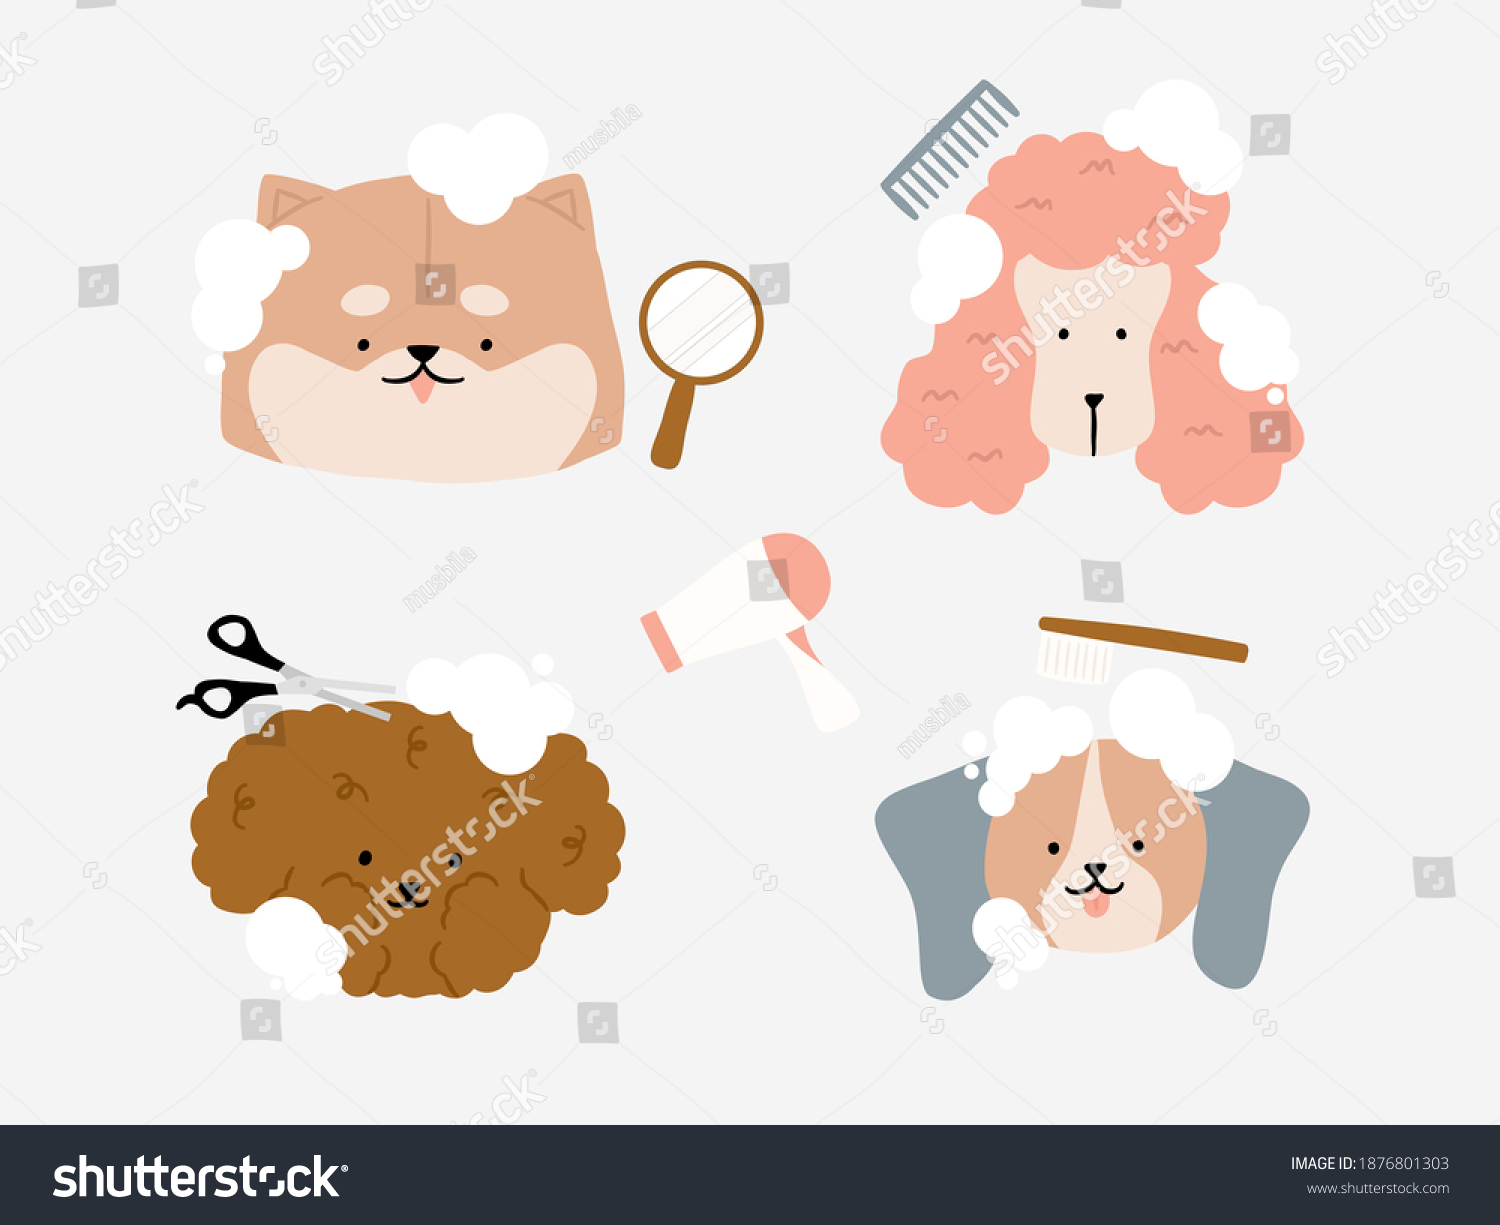 SVG of Cute dog with bubble at Groomer Salon Dog friendly area. Pet Hair Salon, Styling and Grooming Shop. Pet Store for Dogs with elements Cut Wool, Comb Brush, Drying, Hand mirror and comb illustration. svg